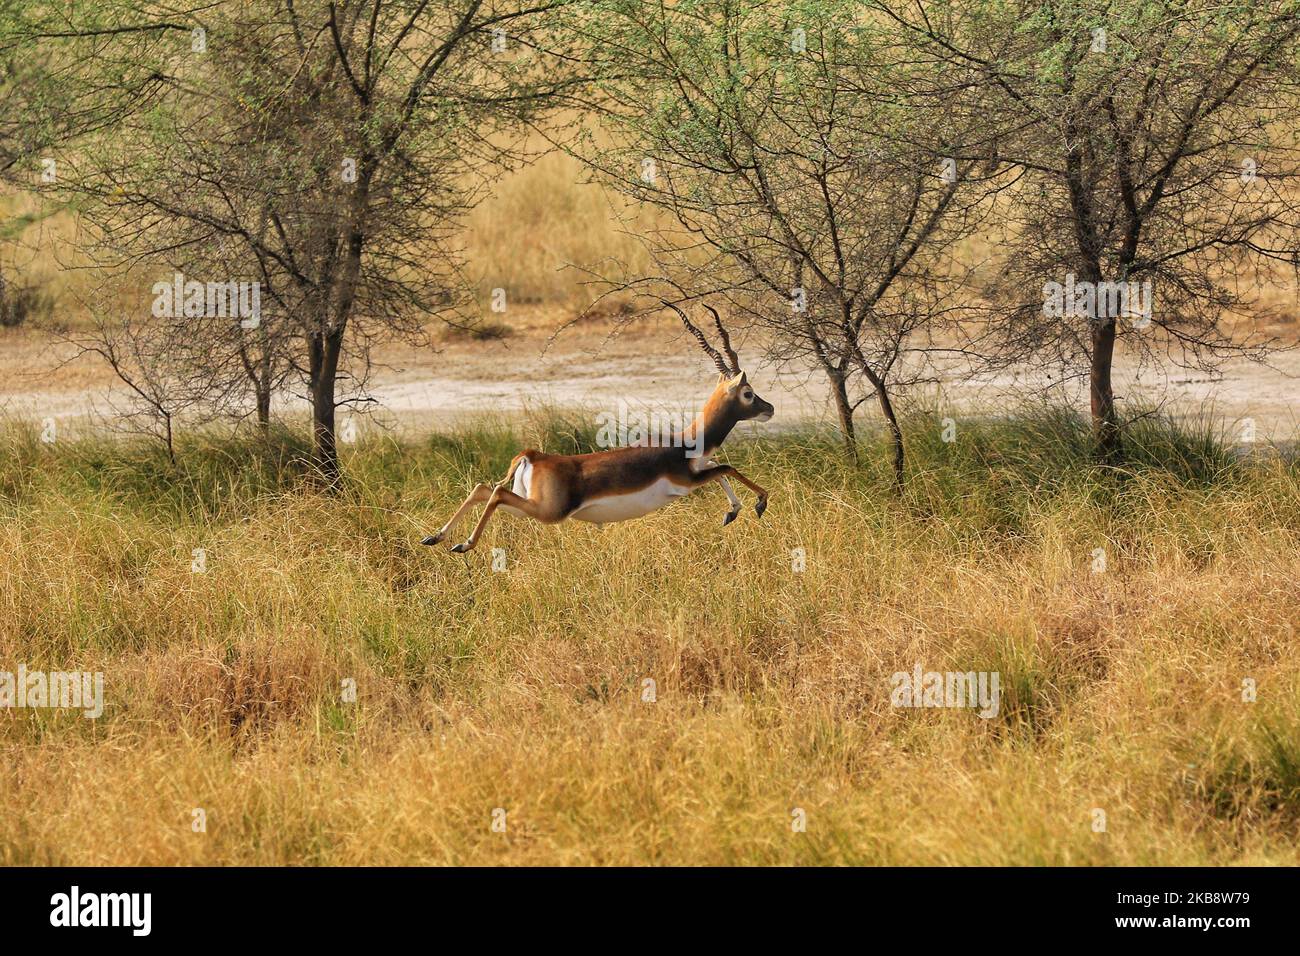 Black buck jump at Tal Chhapar Sanctuary in Churu district of Rajasthan, India, Oct 21,2019.Tal Chhapar Sanctuary it is known for black bucks and is also home to a variety of birds. The sanctuary is 210 km from Jaipur on the fringe of the Great Indian Desert and situated on road from Ratangarh to Sujangarh. The Tal Chhapar sanctuary lies in the Sujangarh Tehsil of Churu District.(Photo By Vishal Bhatnagar/NurPhoto) (Photo by Vishal Bhatnagar/NurPhoto) Stock Photo